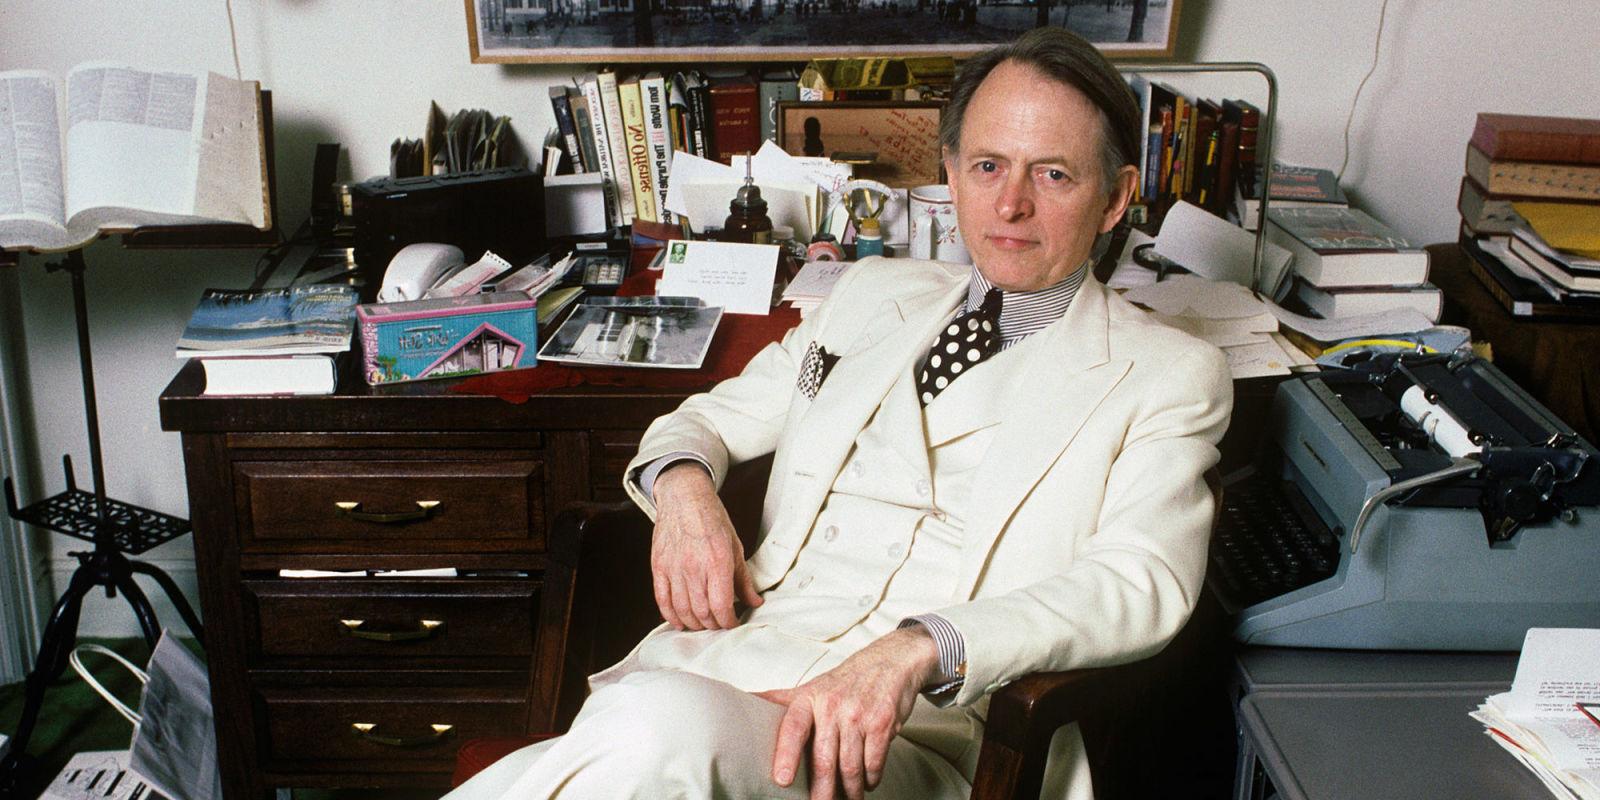 A picture of Journalist Tom Wolfe in his youth